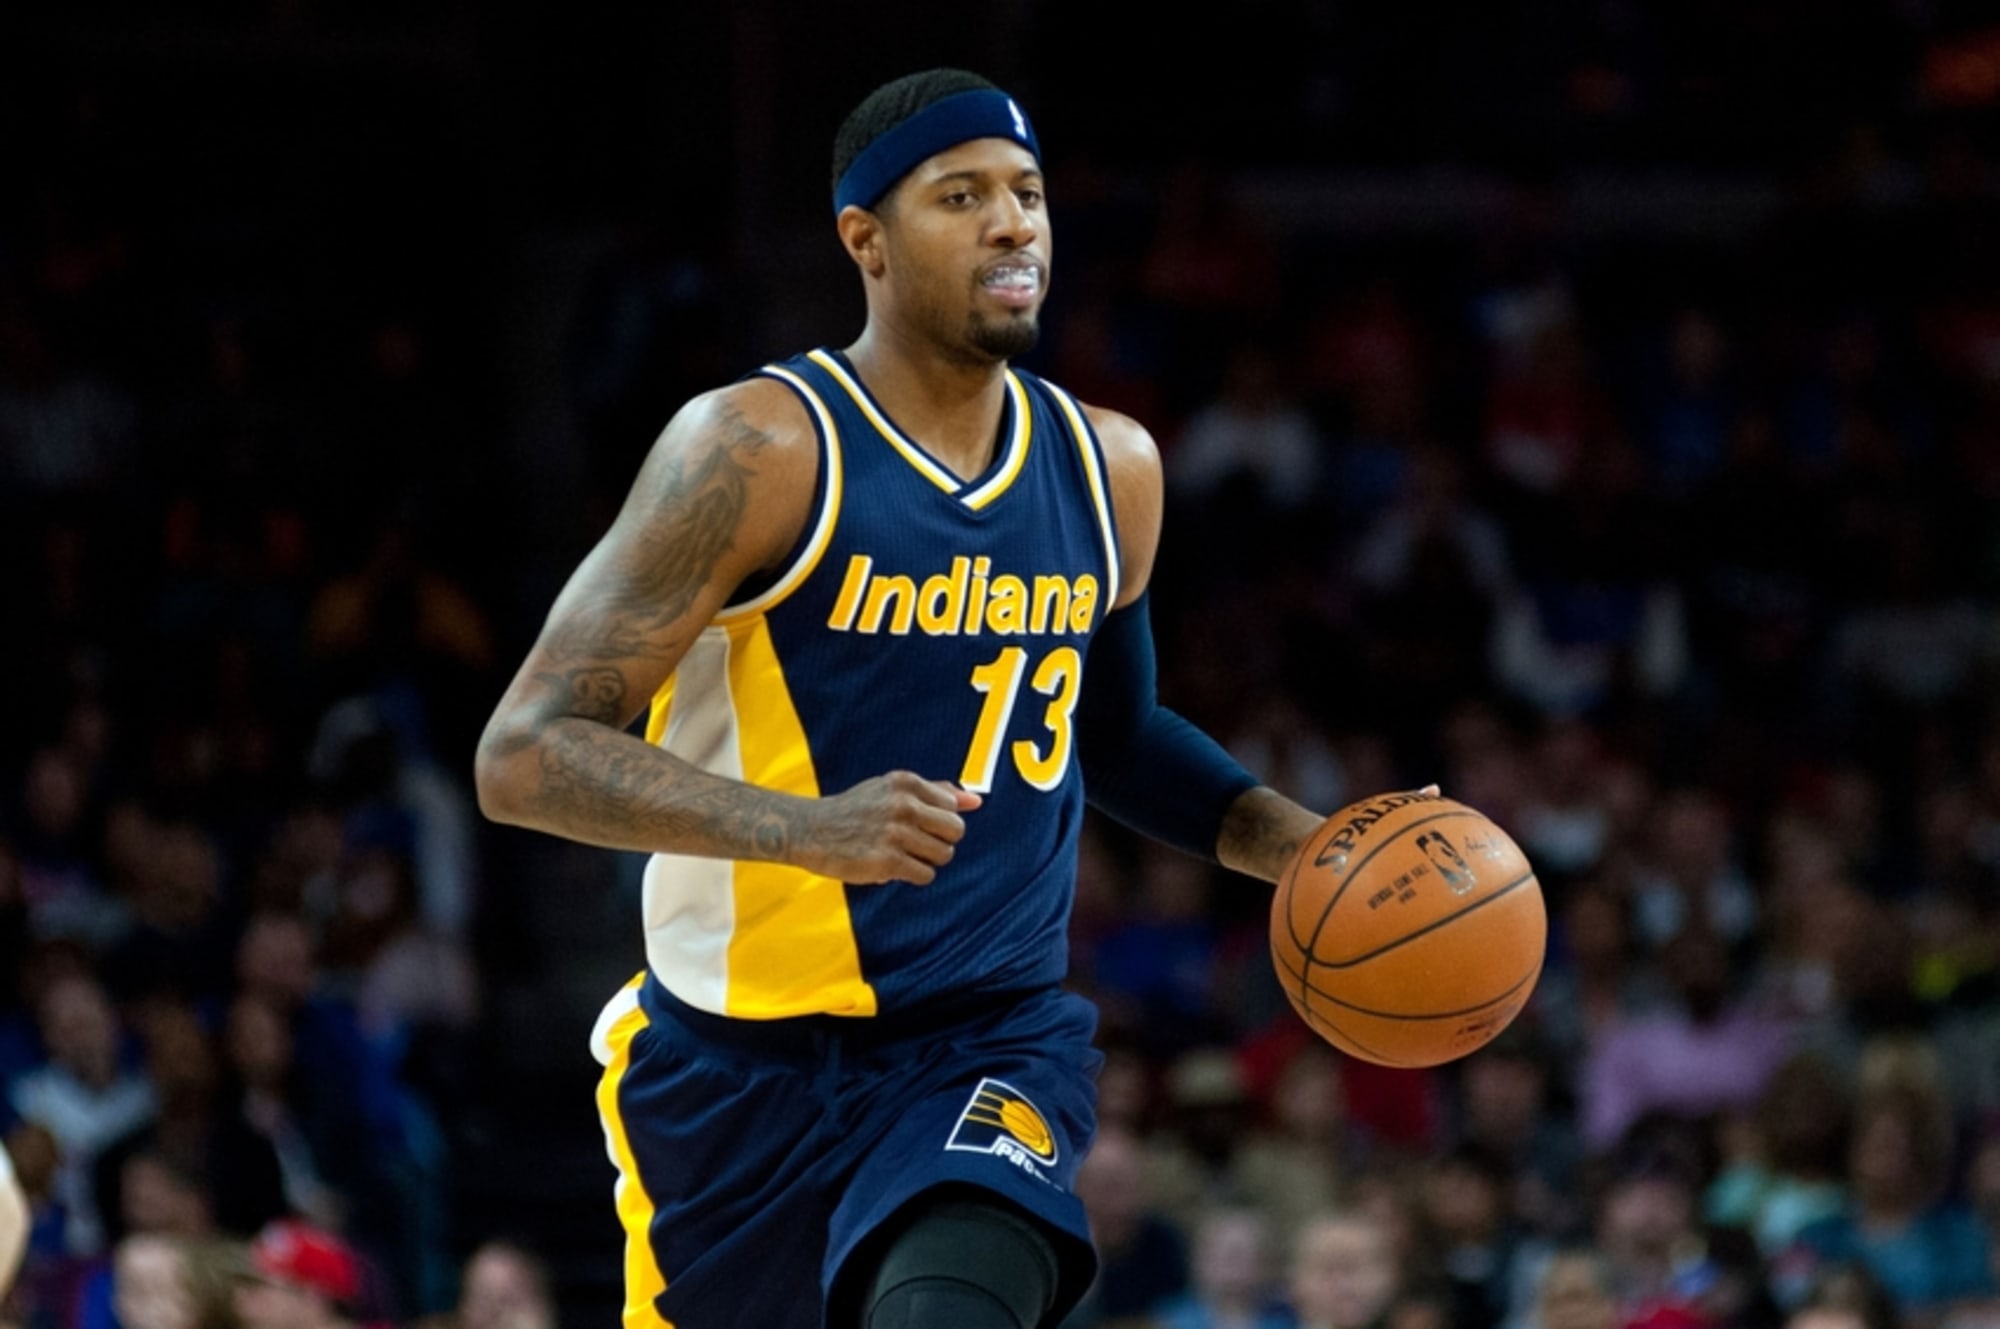 Paul George to Change Jersey Number to 13